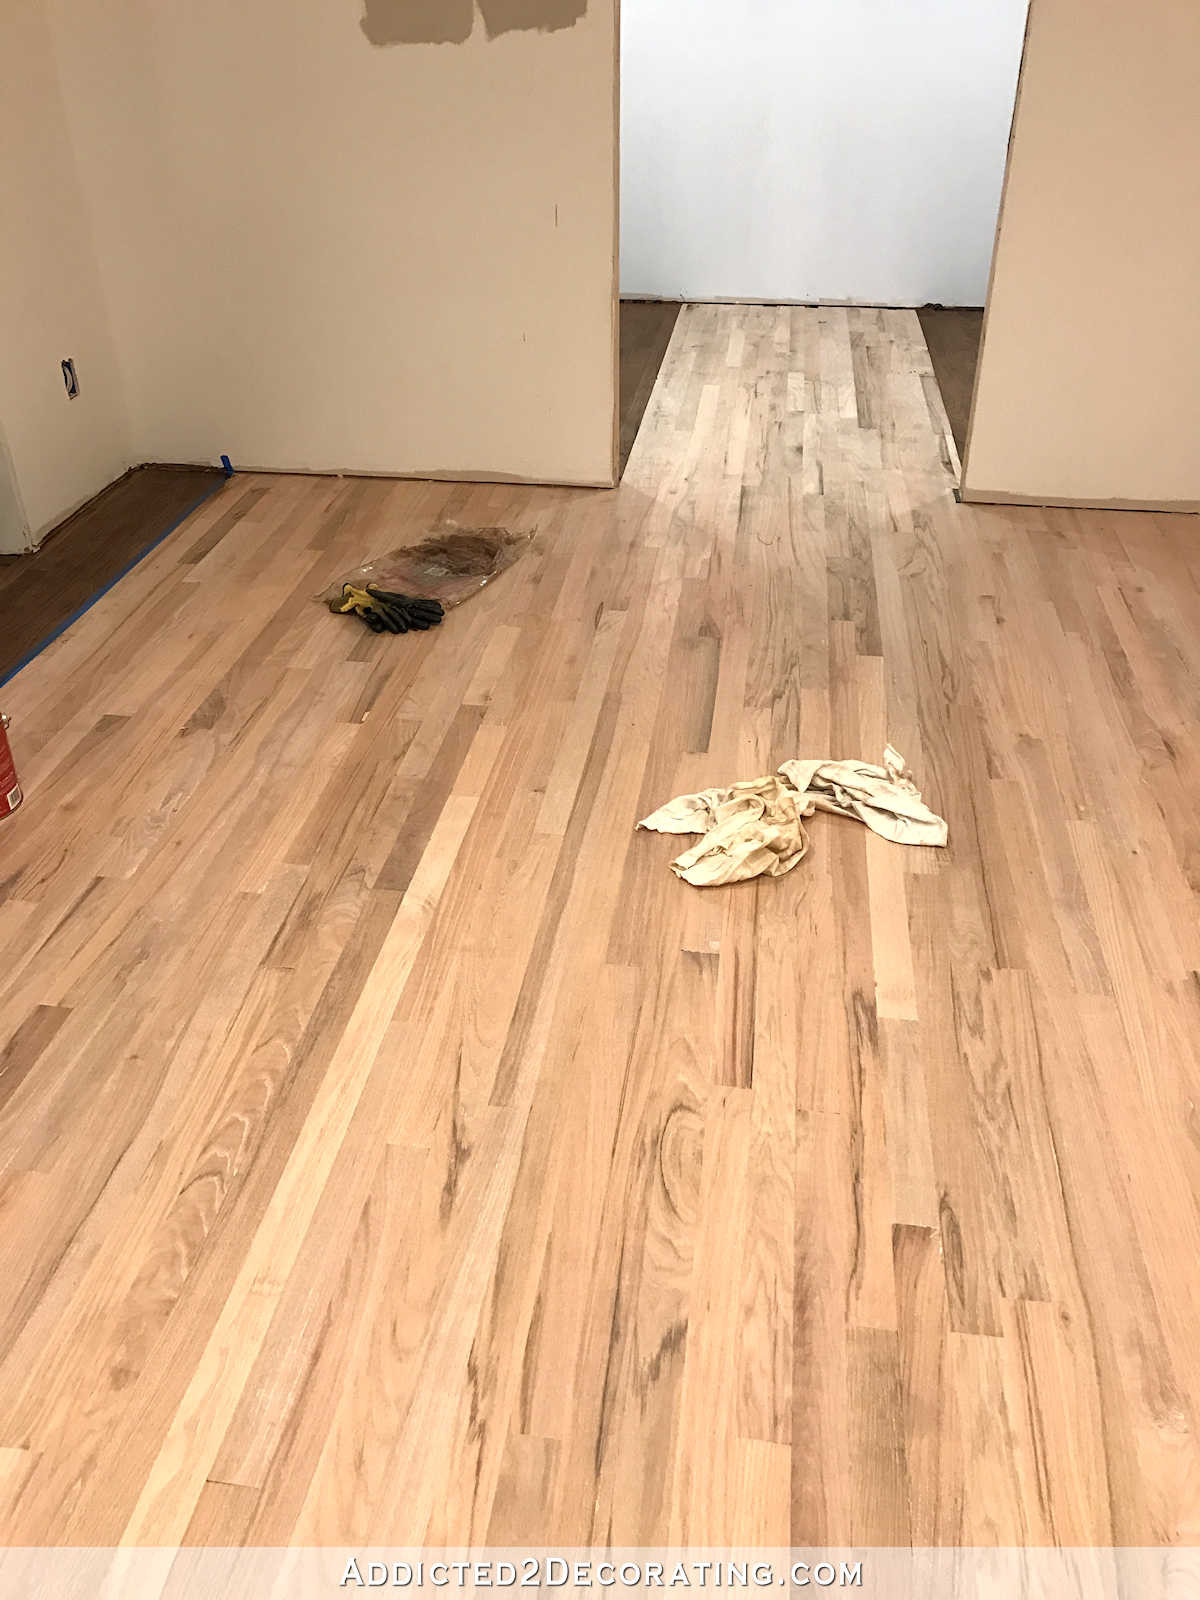 Hardwood Floor Finish Problems Of Adventures In Staining My Red Oak Hardwood Floors Products Process with Regard to Staining Red Oak Hardwood Floors 12 Breakfast Room and Center Of Pantry Left to